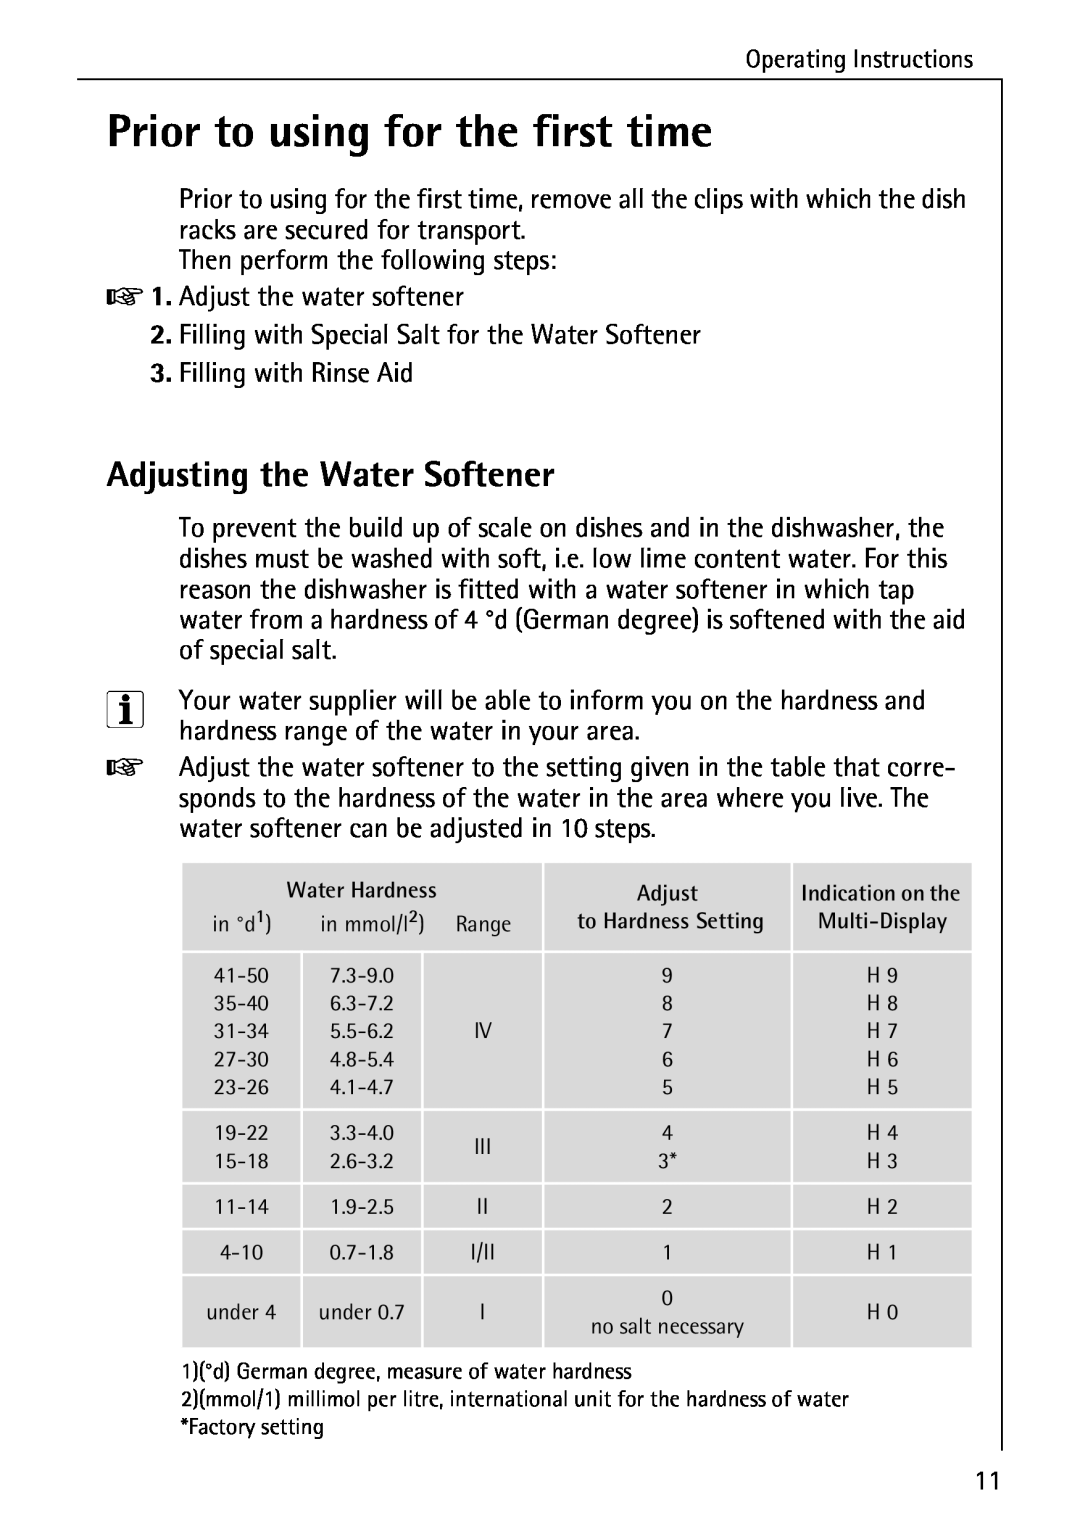 AEG 80800 manual Prior to using for the first time, Adjusting the Water Softener 